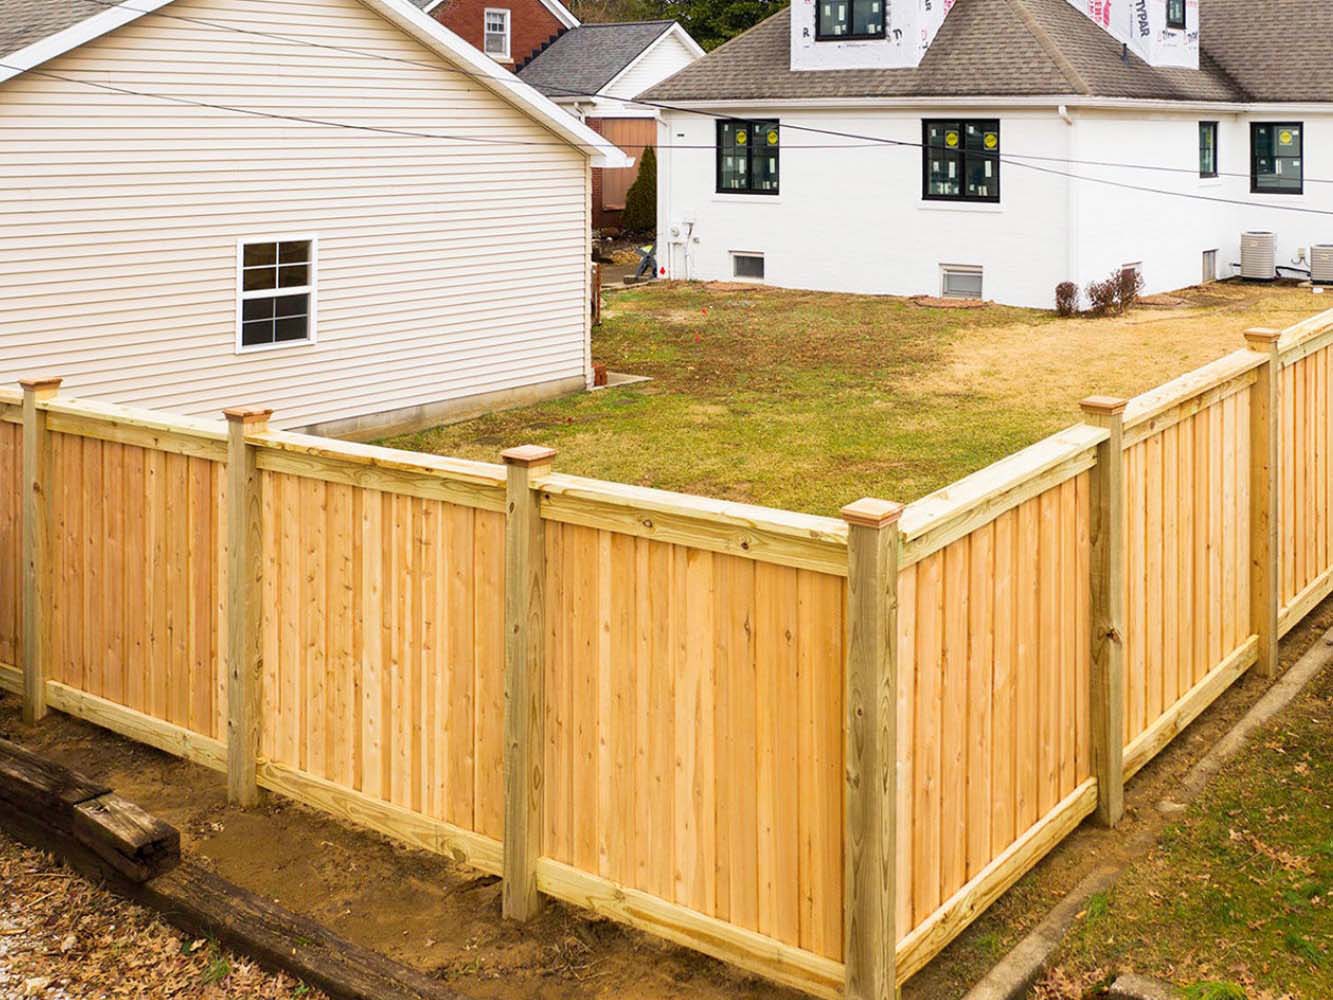 Ribeyre Island IN cap and trim style wood fence